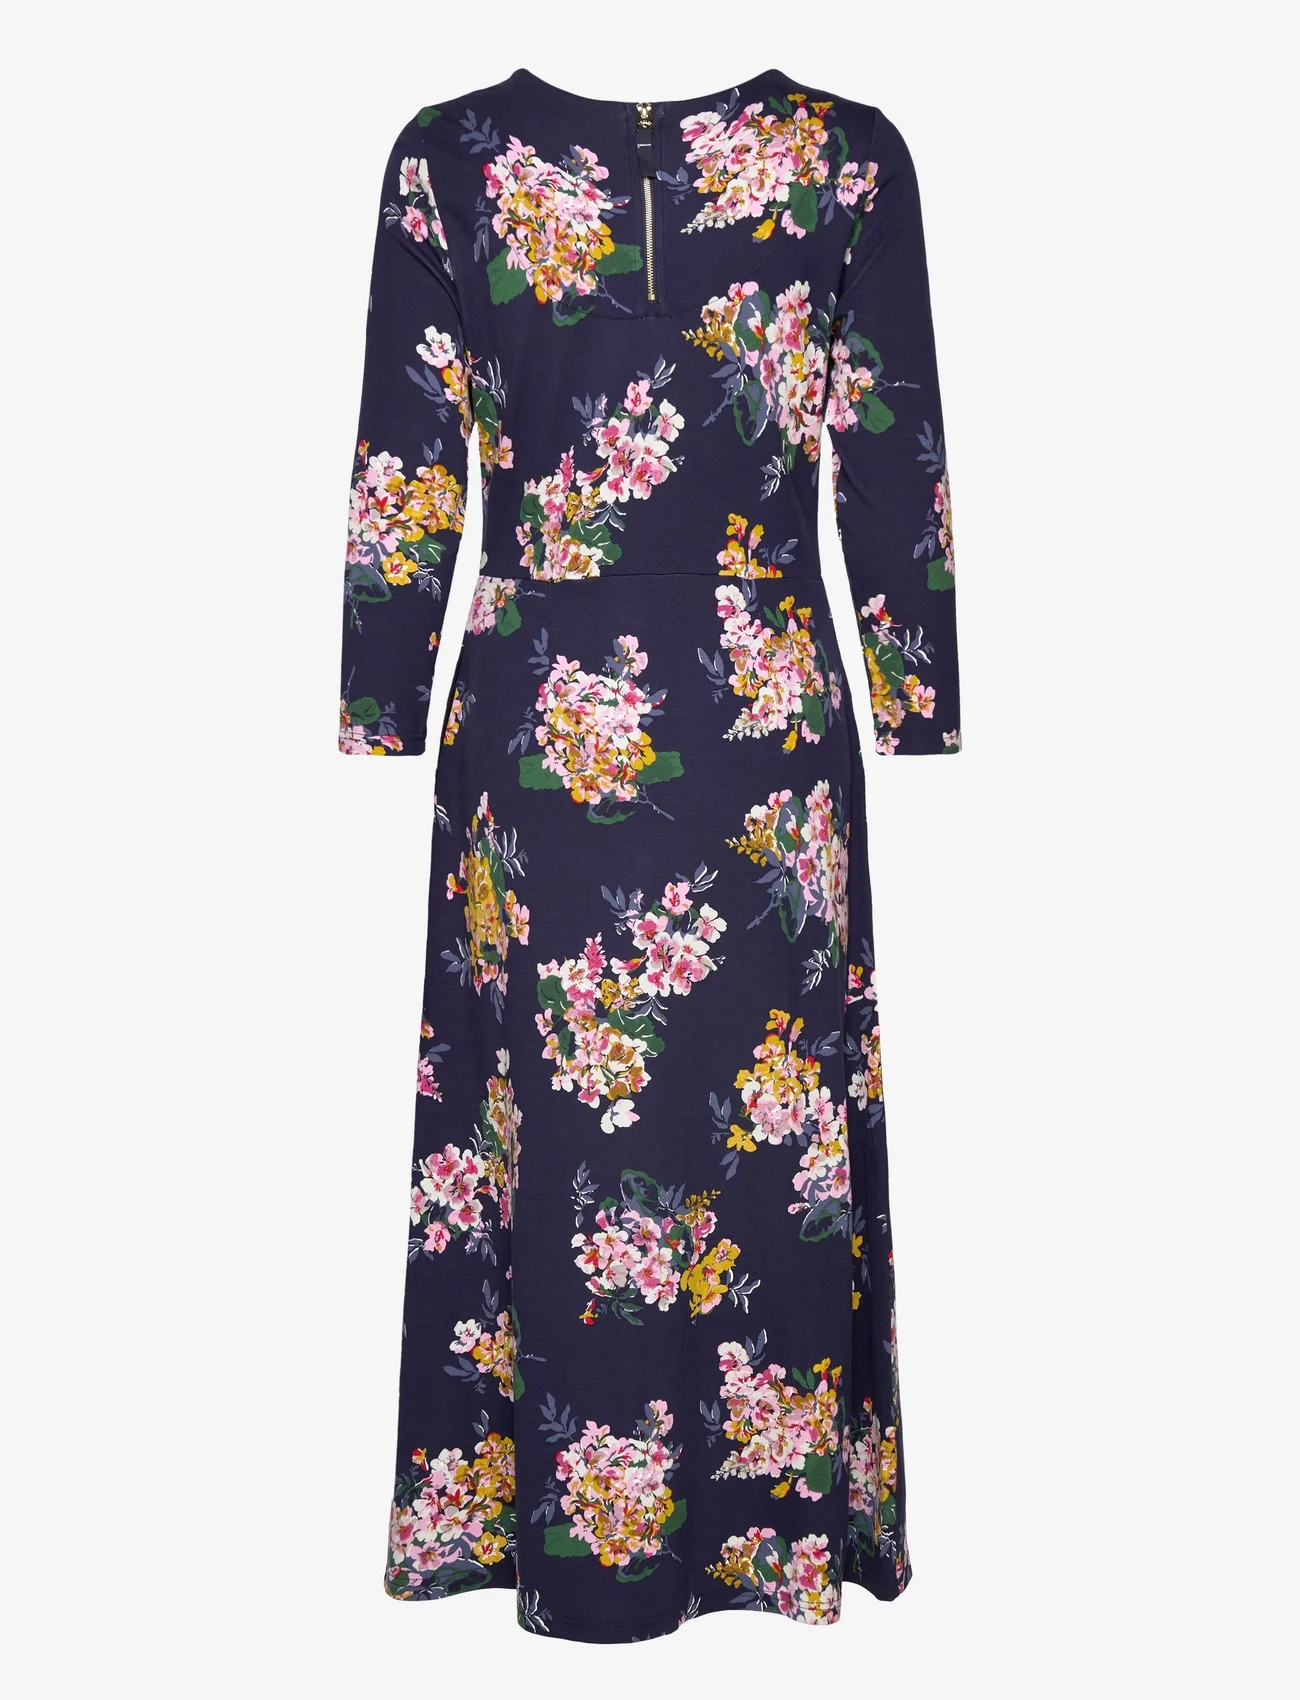 Joules - Elodie - t-shirt dresses - navy floral - 1